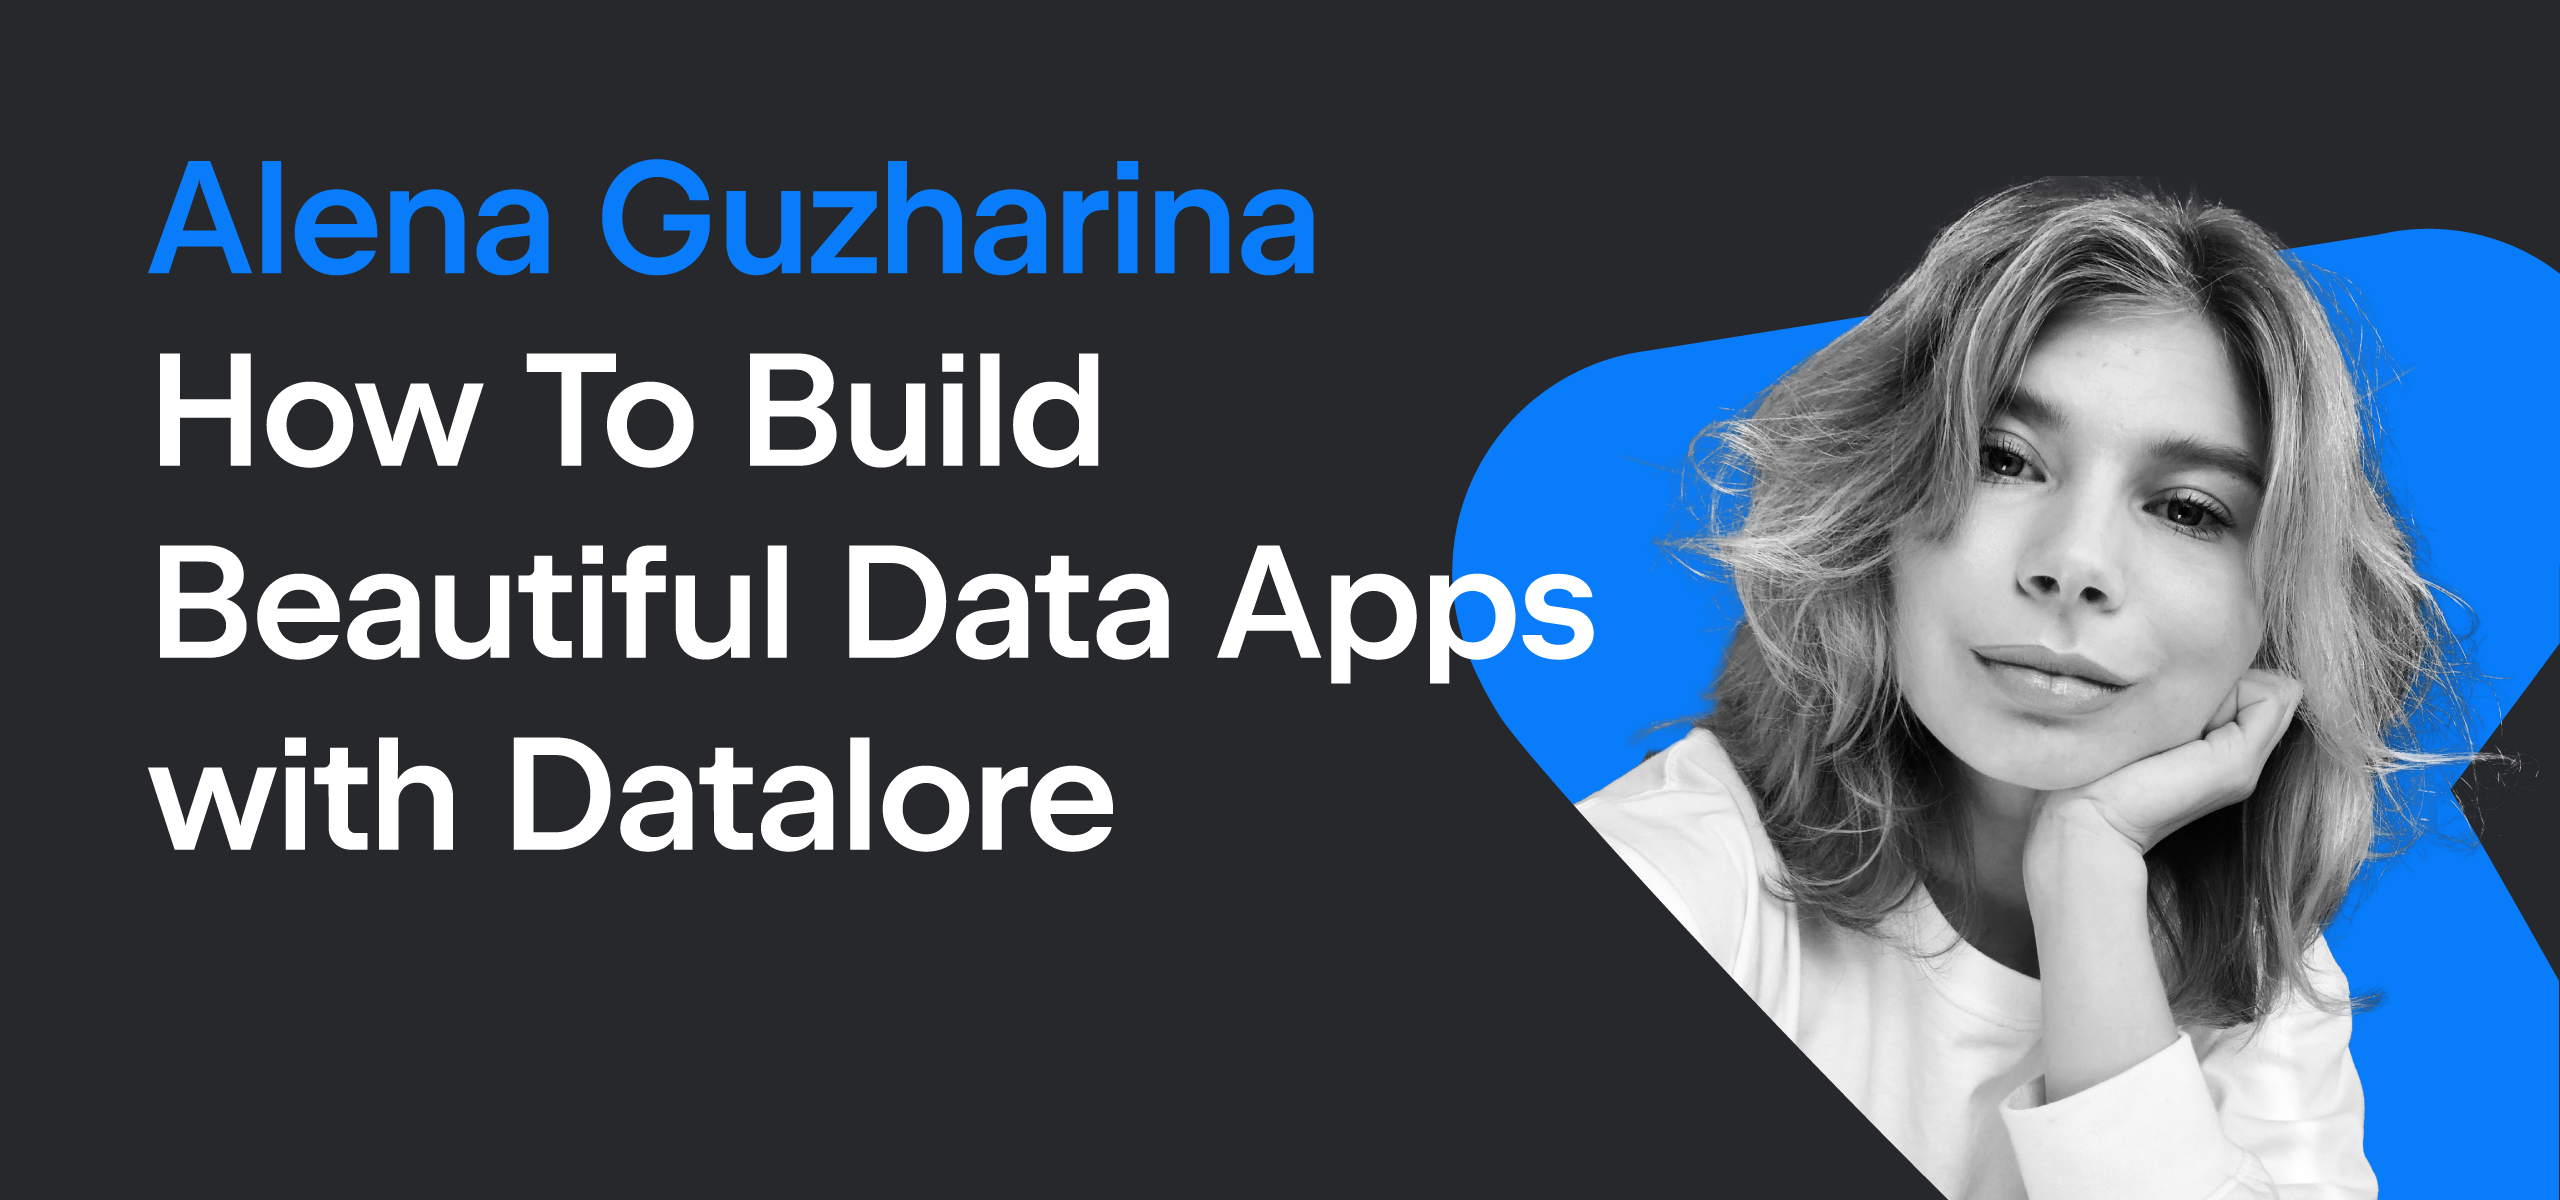 How to Build Beautiful Data Apps with Datalore – Our Collaborative Data Science Platform